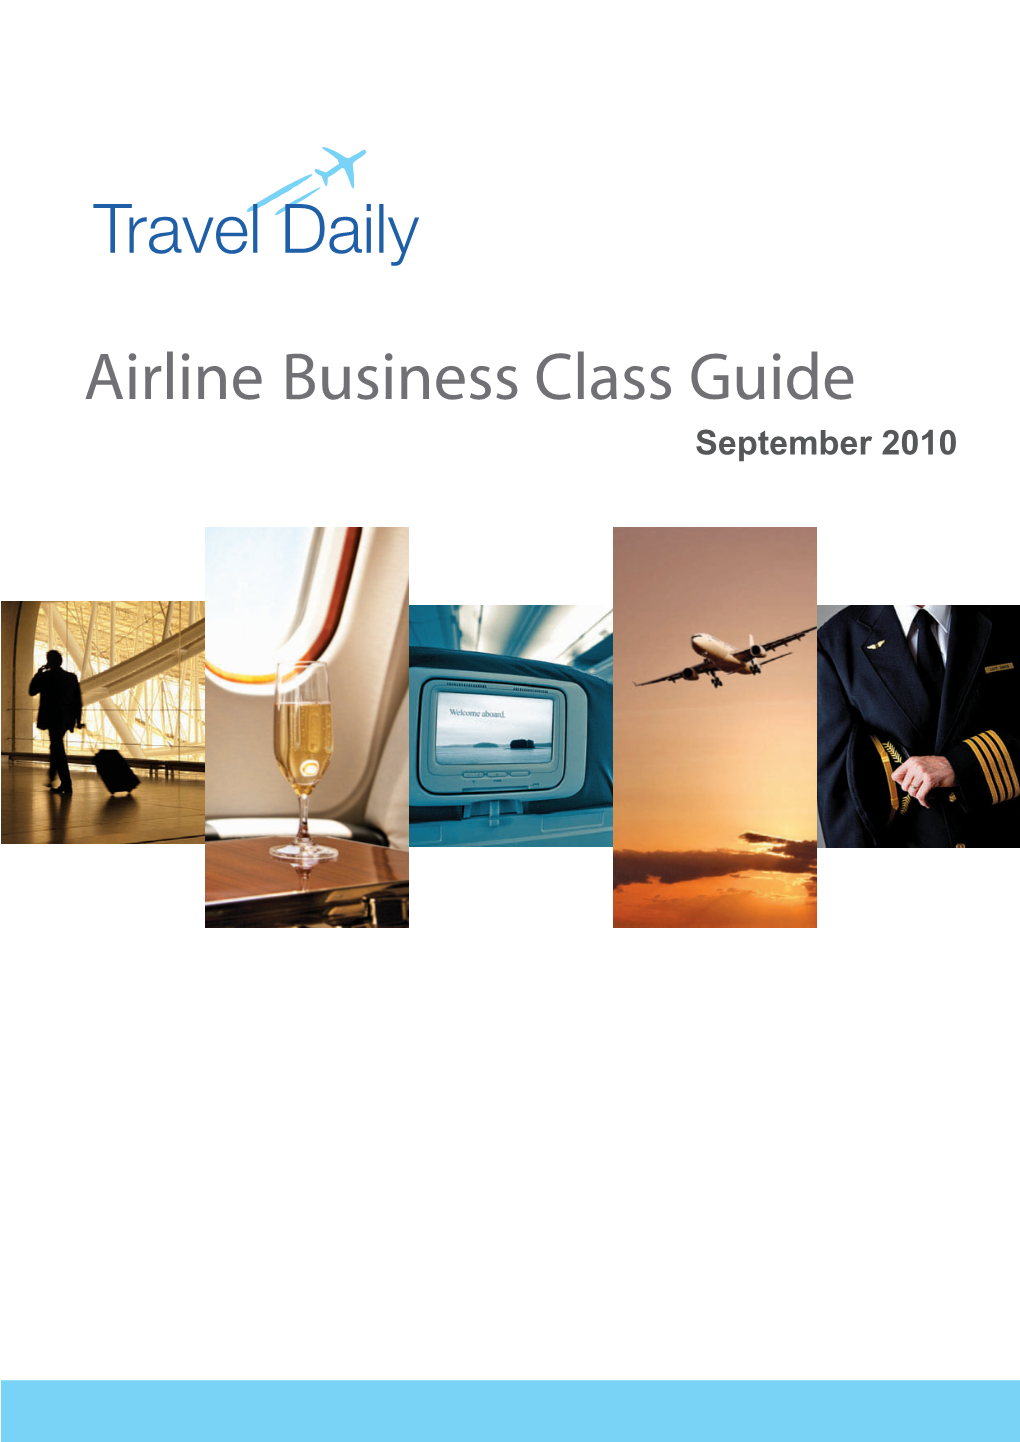 Business Class Guide, Which Gives an Overview of the Business Class Product of Airlines Operating in the Austalian Market